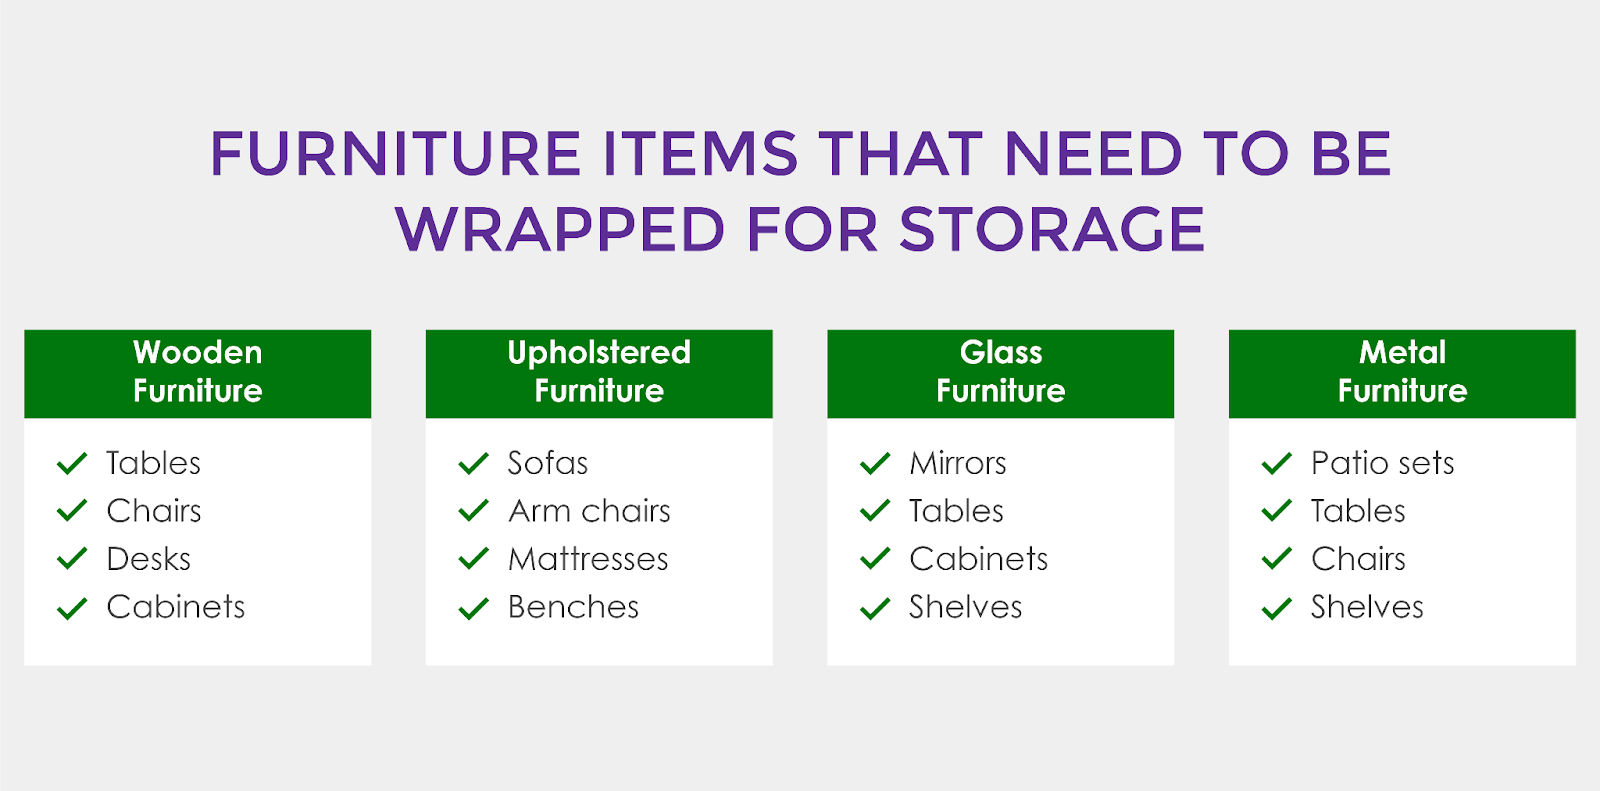 Furniture items that need to be wrapped for storage